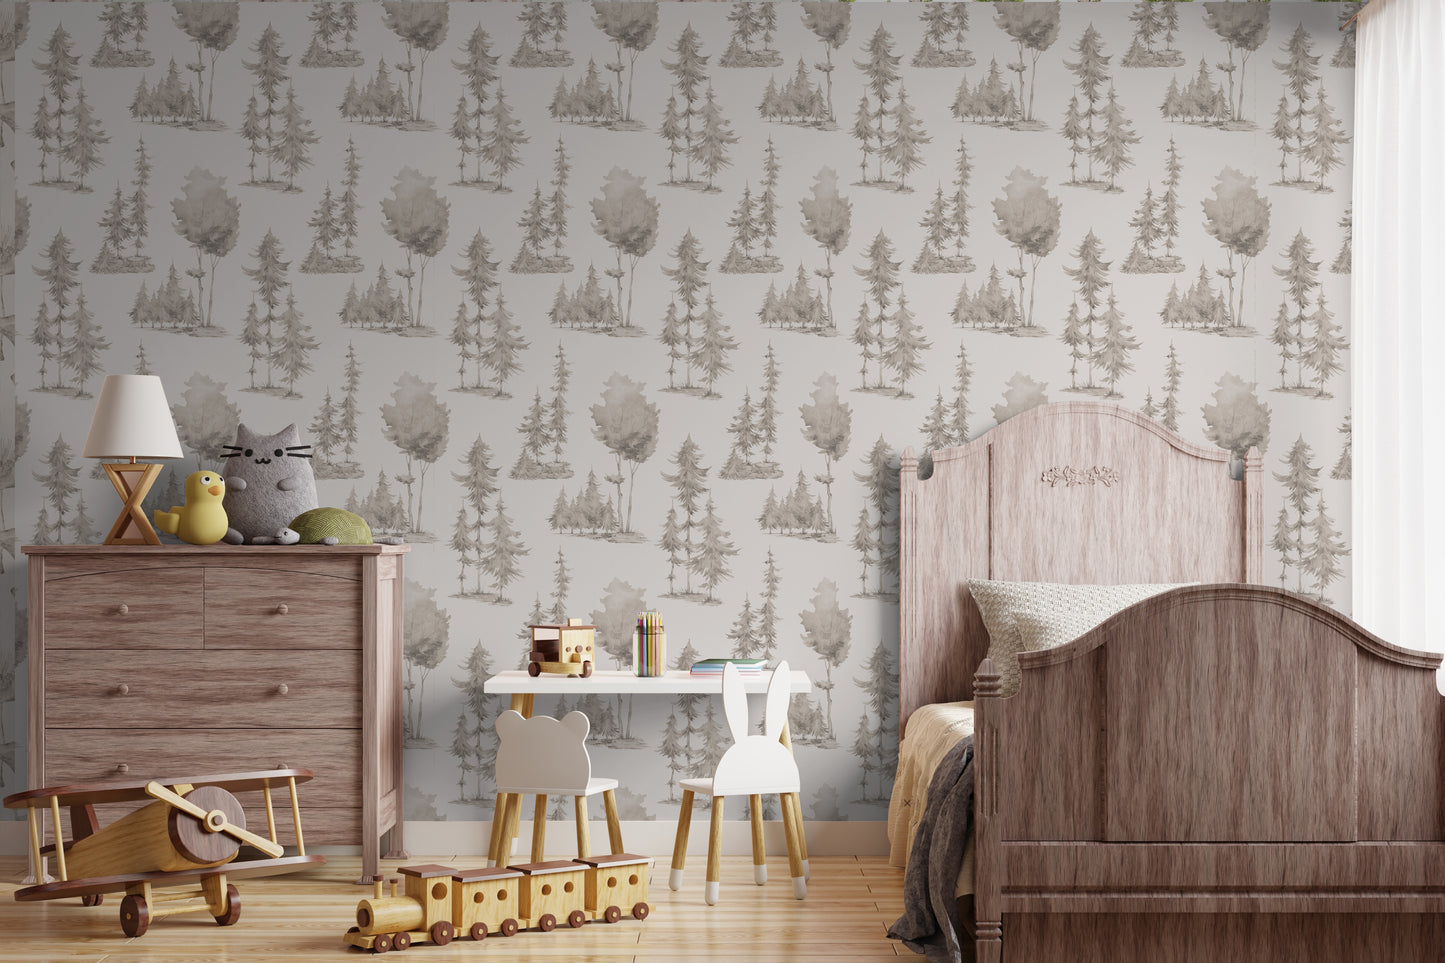 Quiet Little Trees Removable Peel And Stick Wallpaper